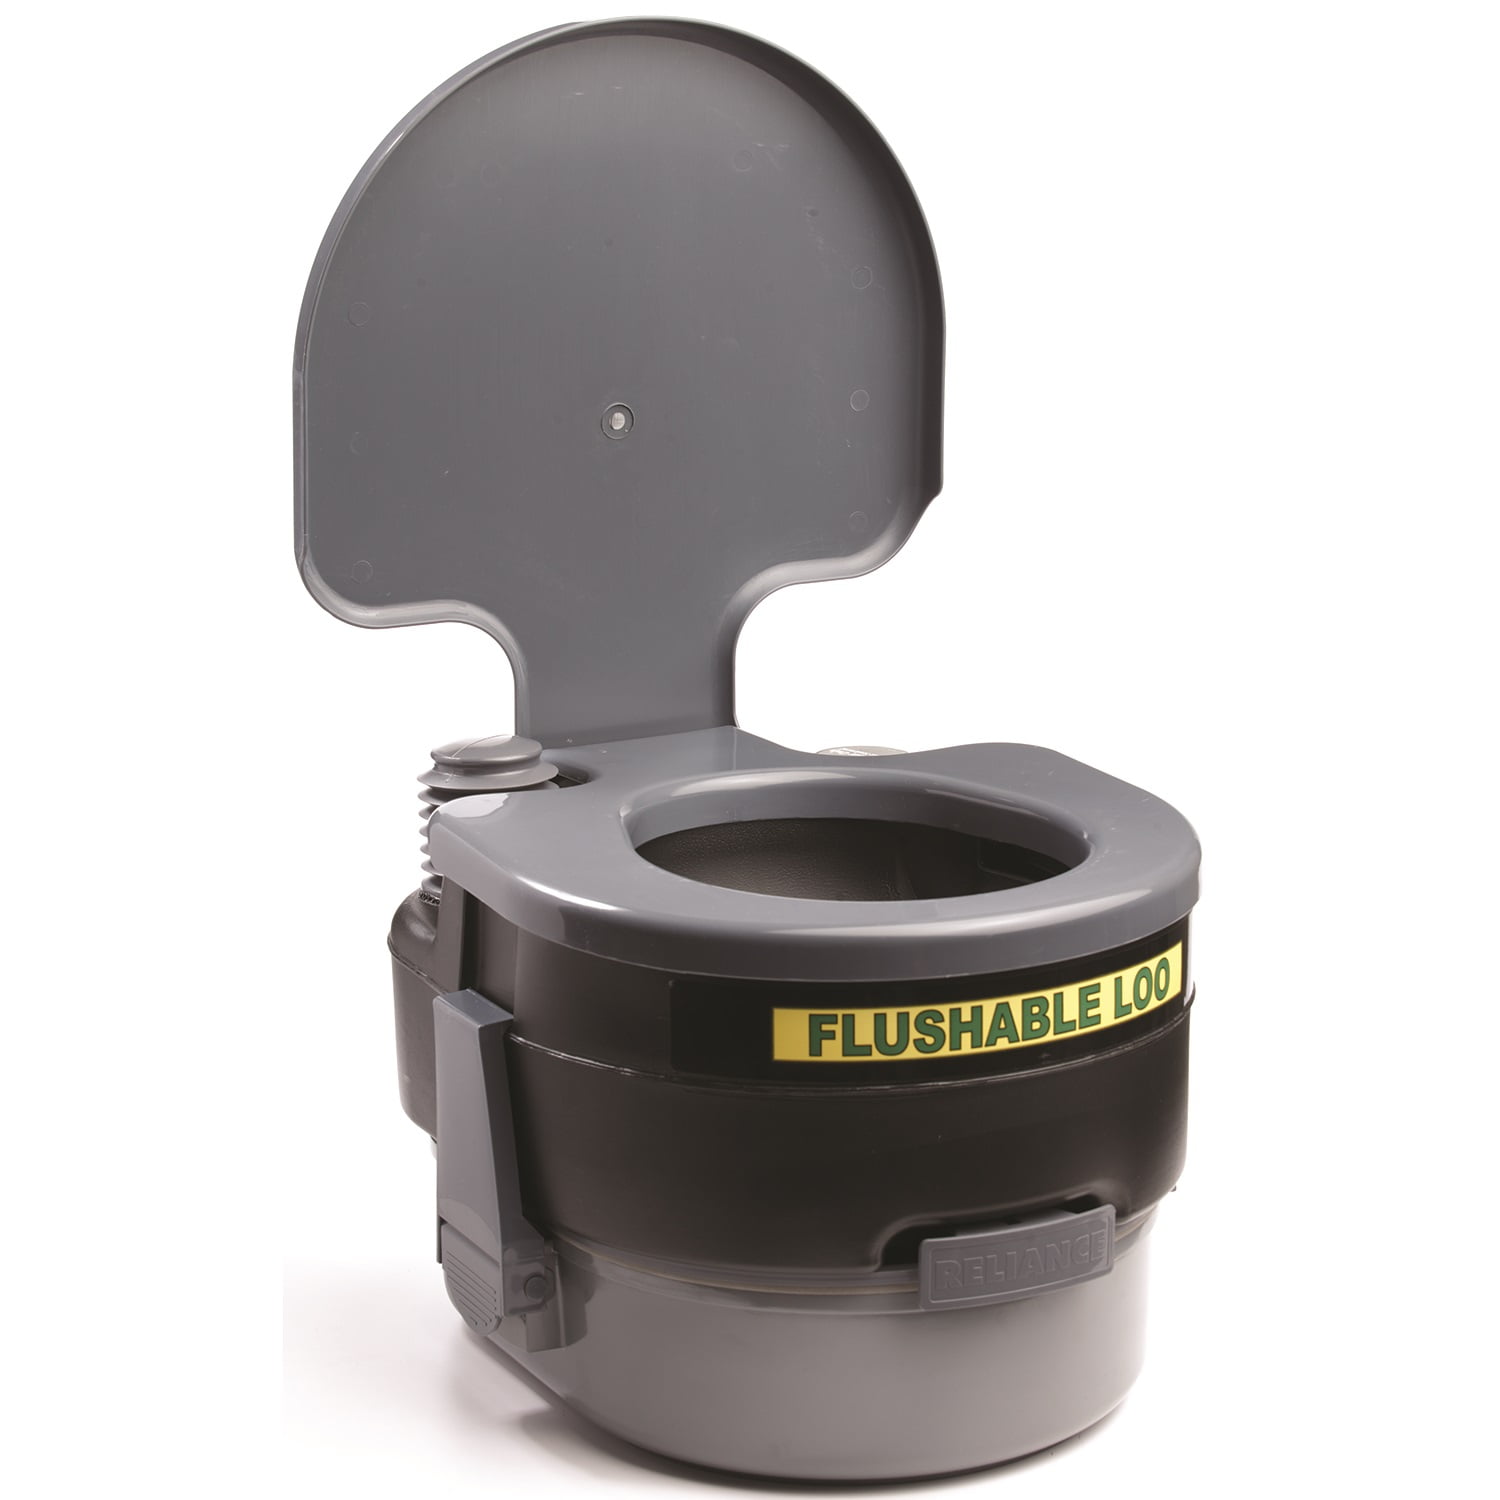 RELIANCE Luggable Loo Portable Camping Toilet 